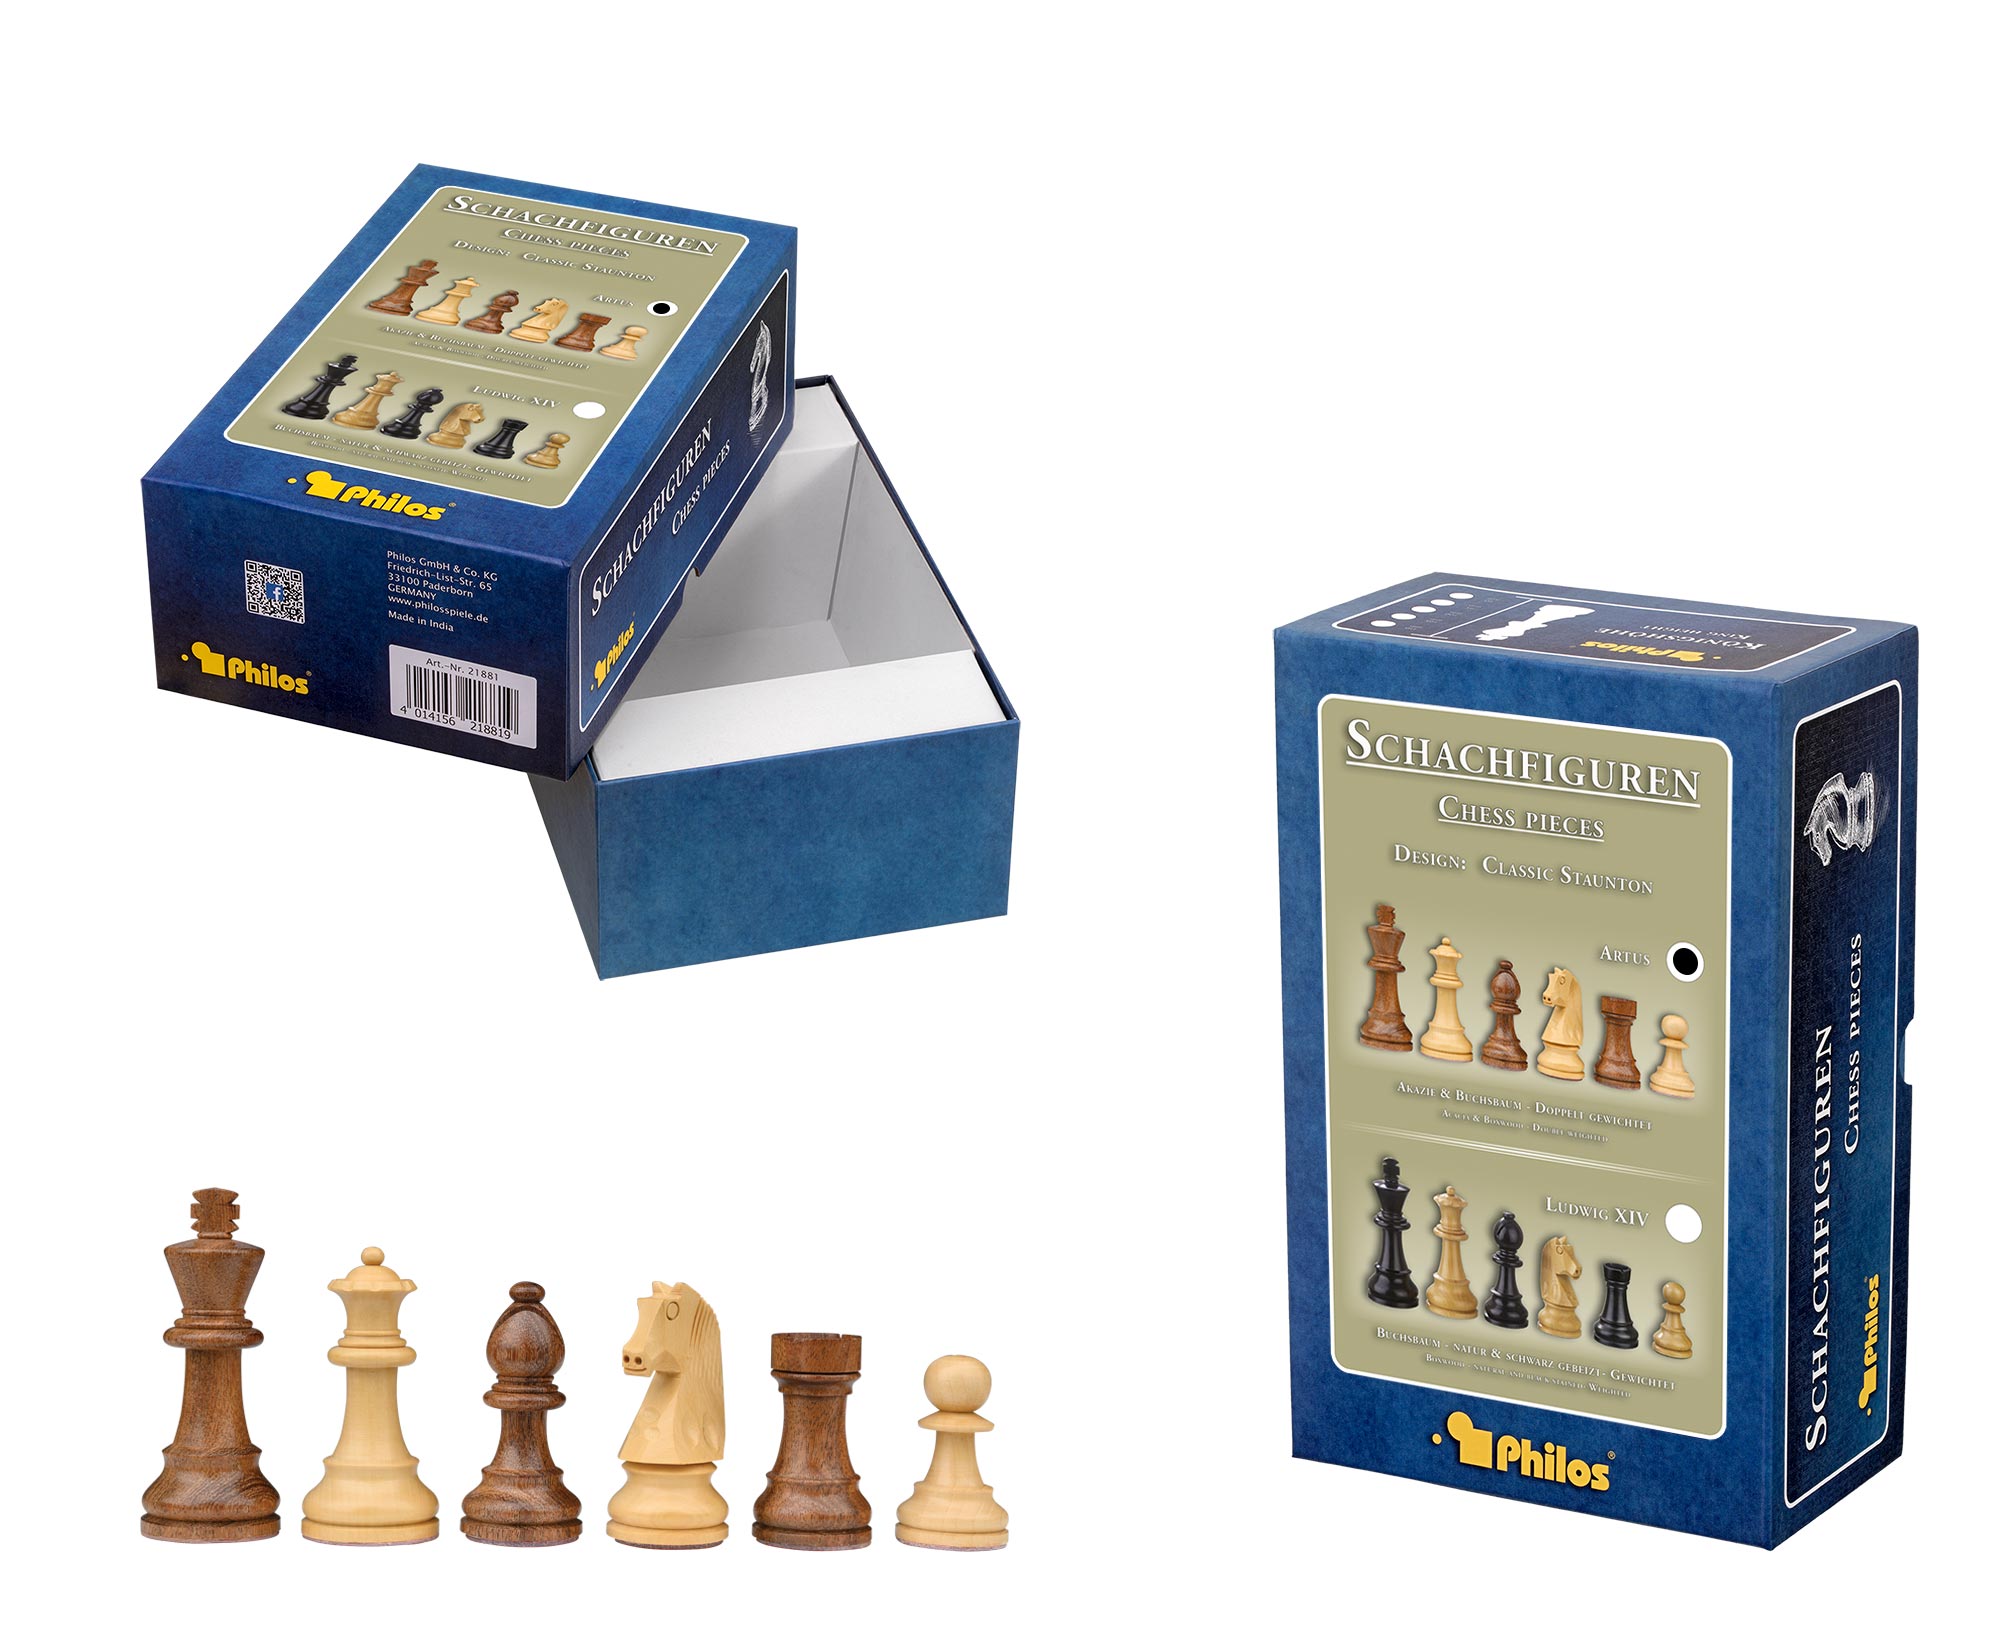 Chess pieces Artus, king height 95 mm, in set-up box